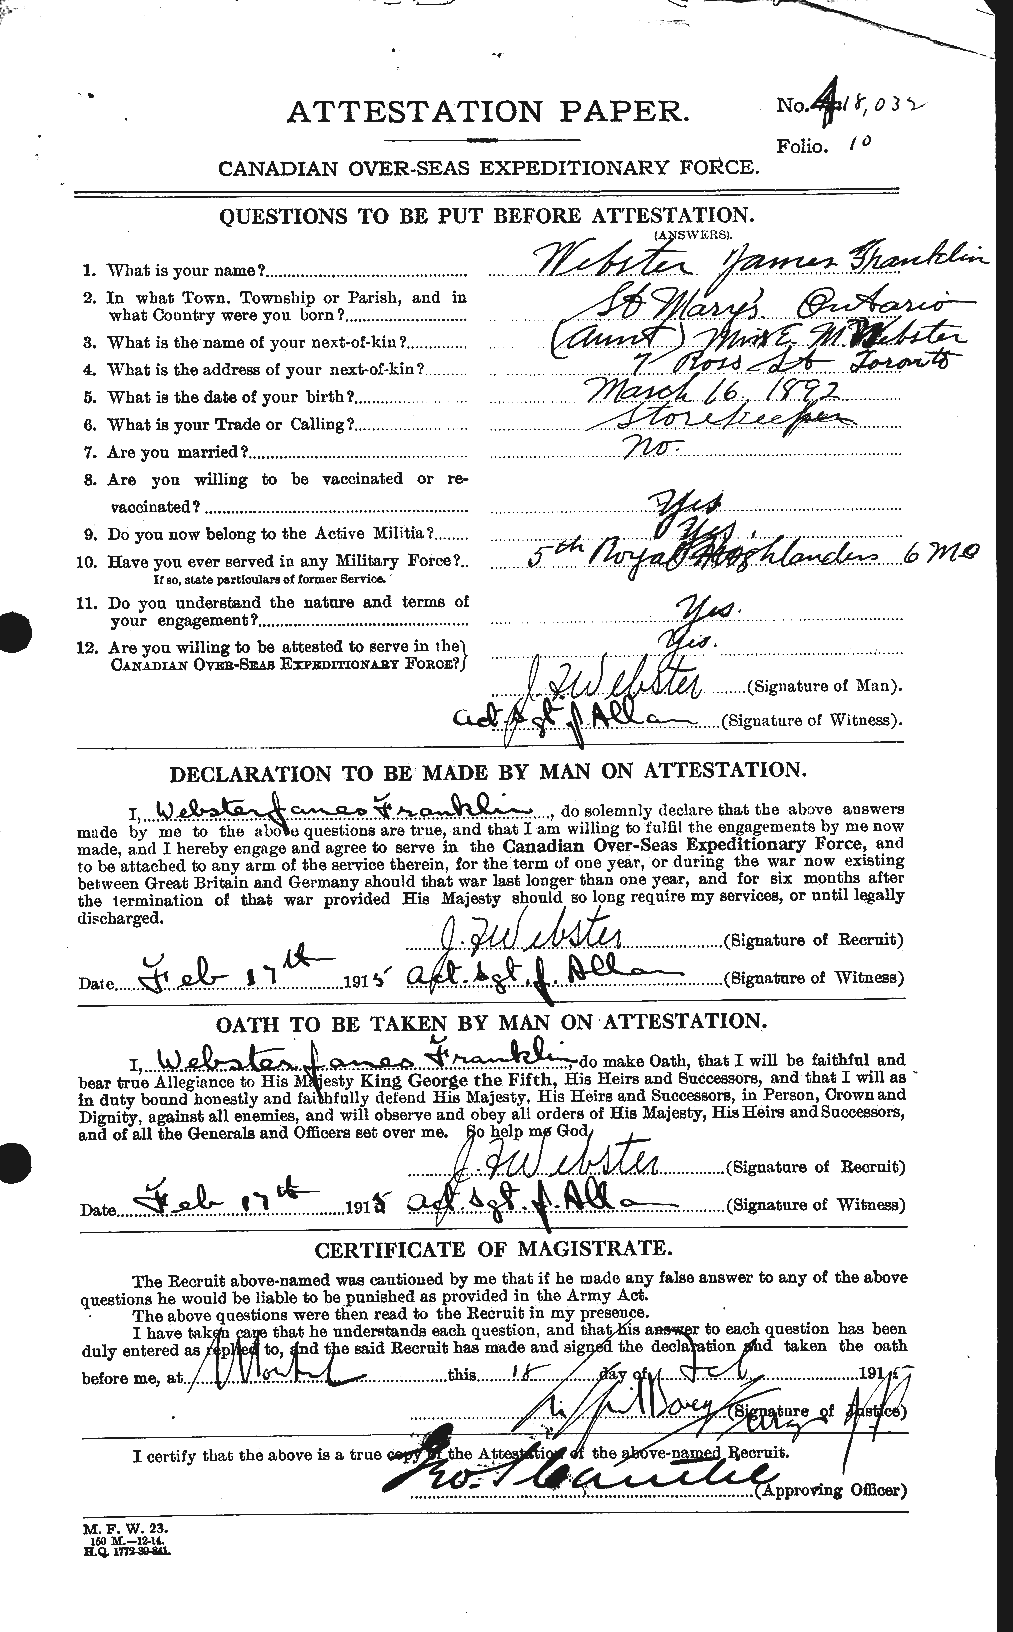 Personnel Records of the First World War - CEF 670458a